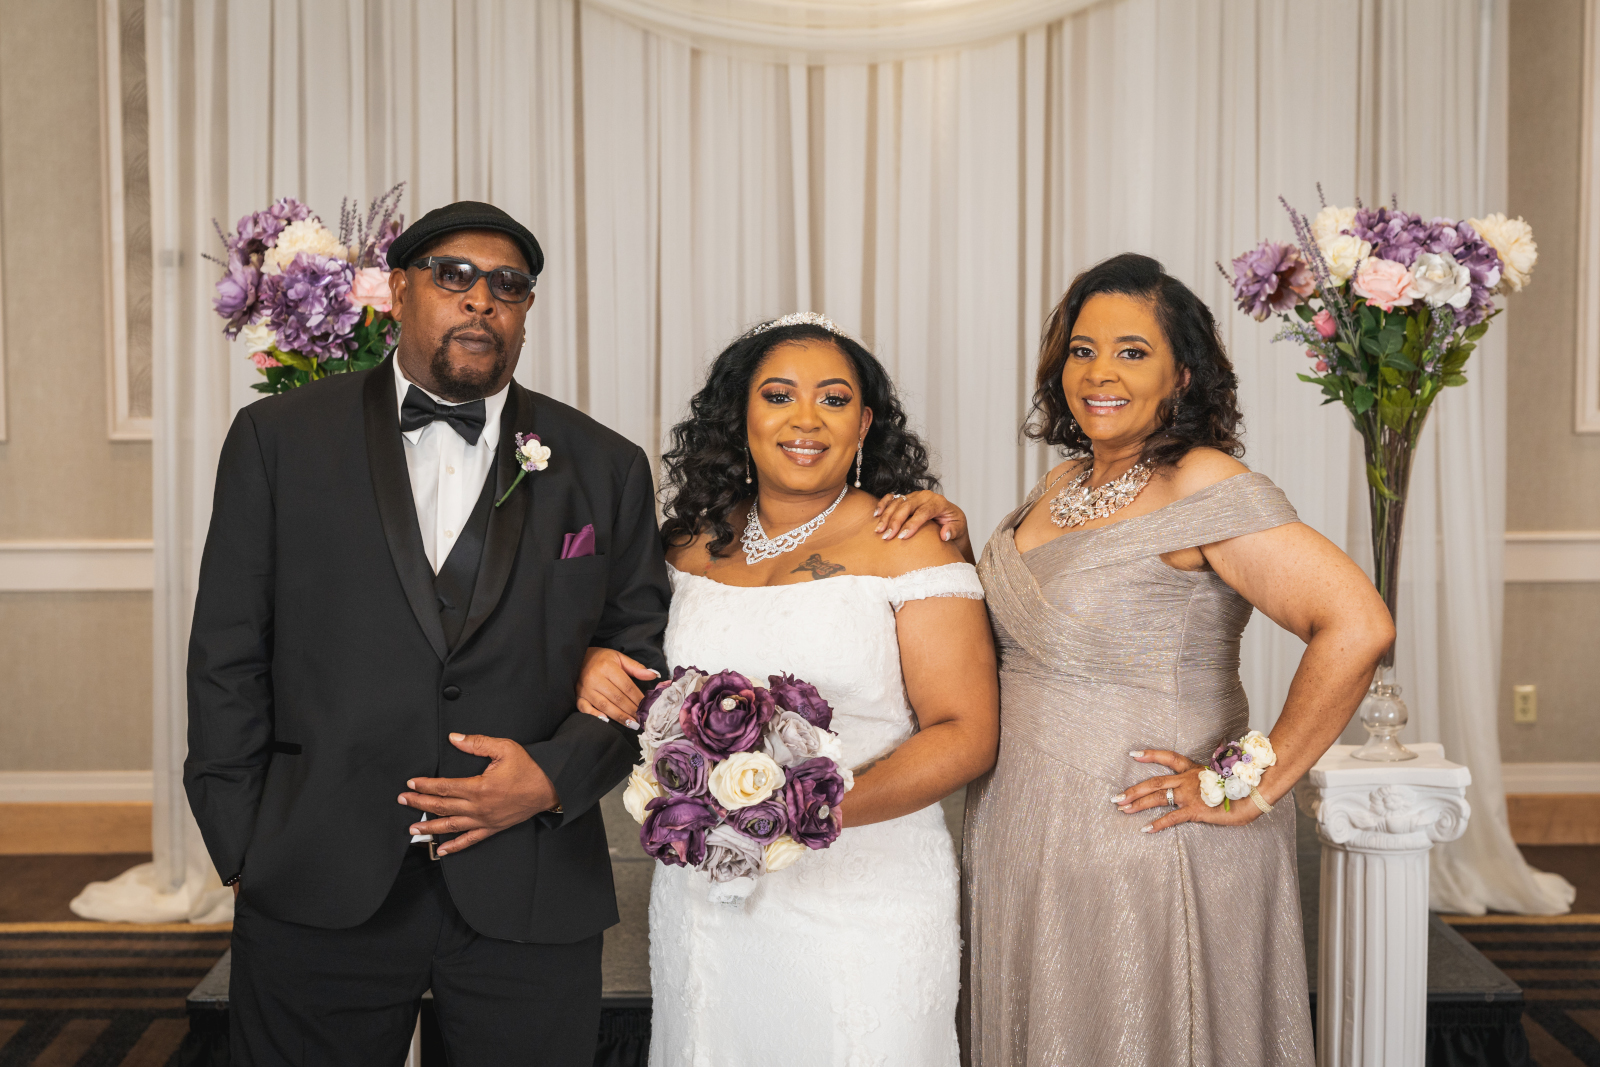 Bride with mom and dad, parents of the bride, family portrait, African American bride, African American wedding, romantic wedding ceremony at Hilton Akron/Fairlawn